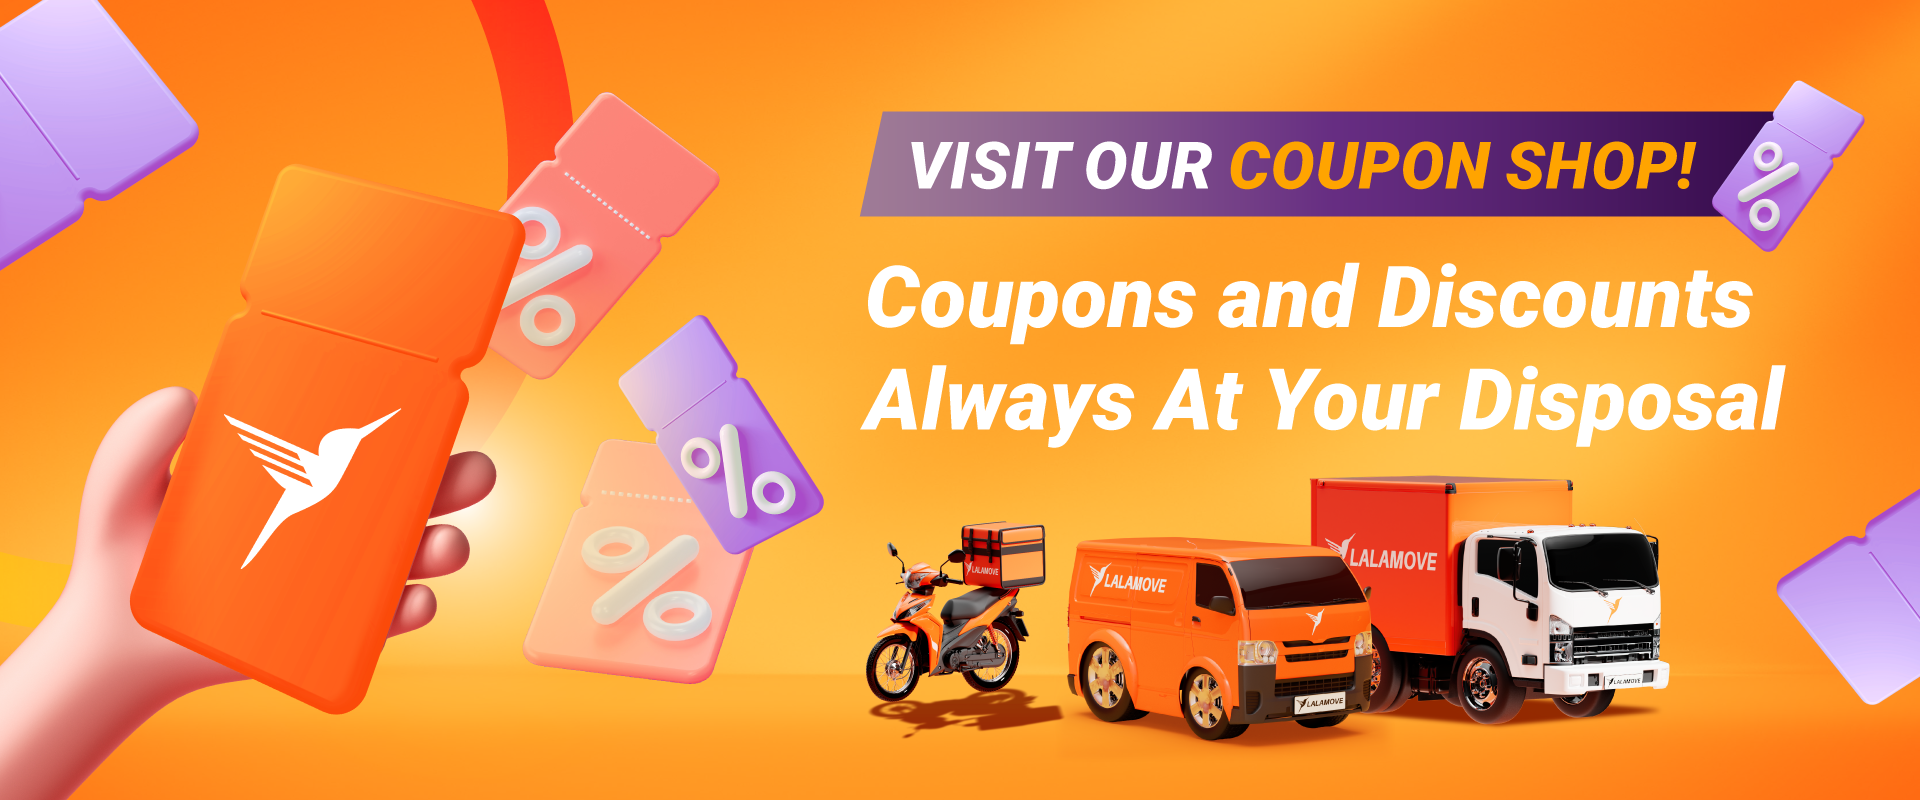 web banner of lalamove coupon shop showing van, lorry, motorcycle with delivery coupons